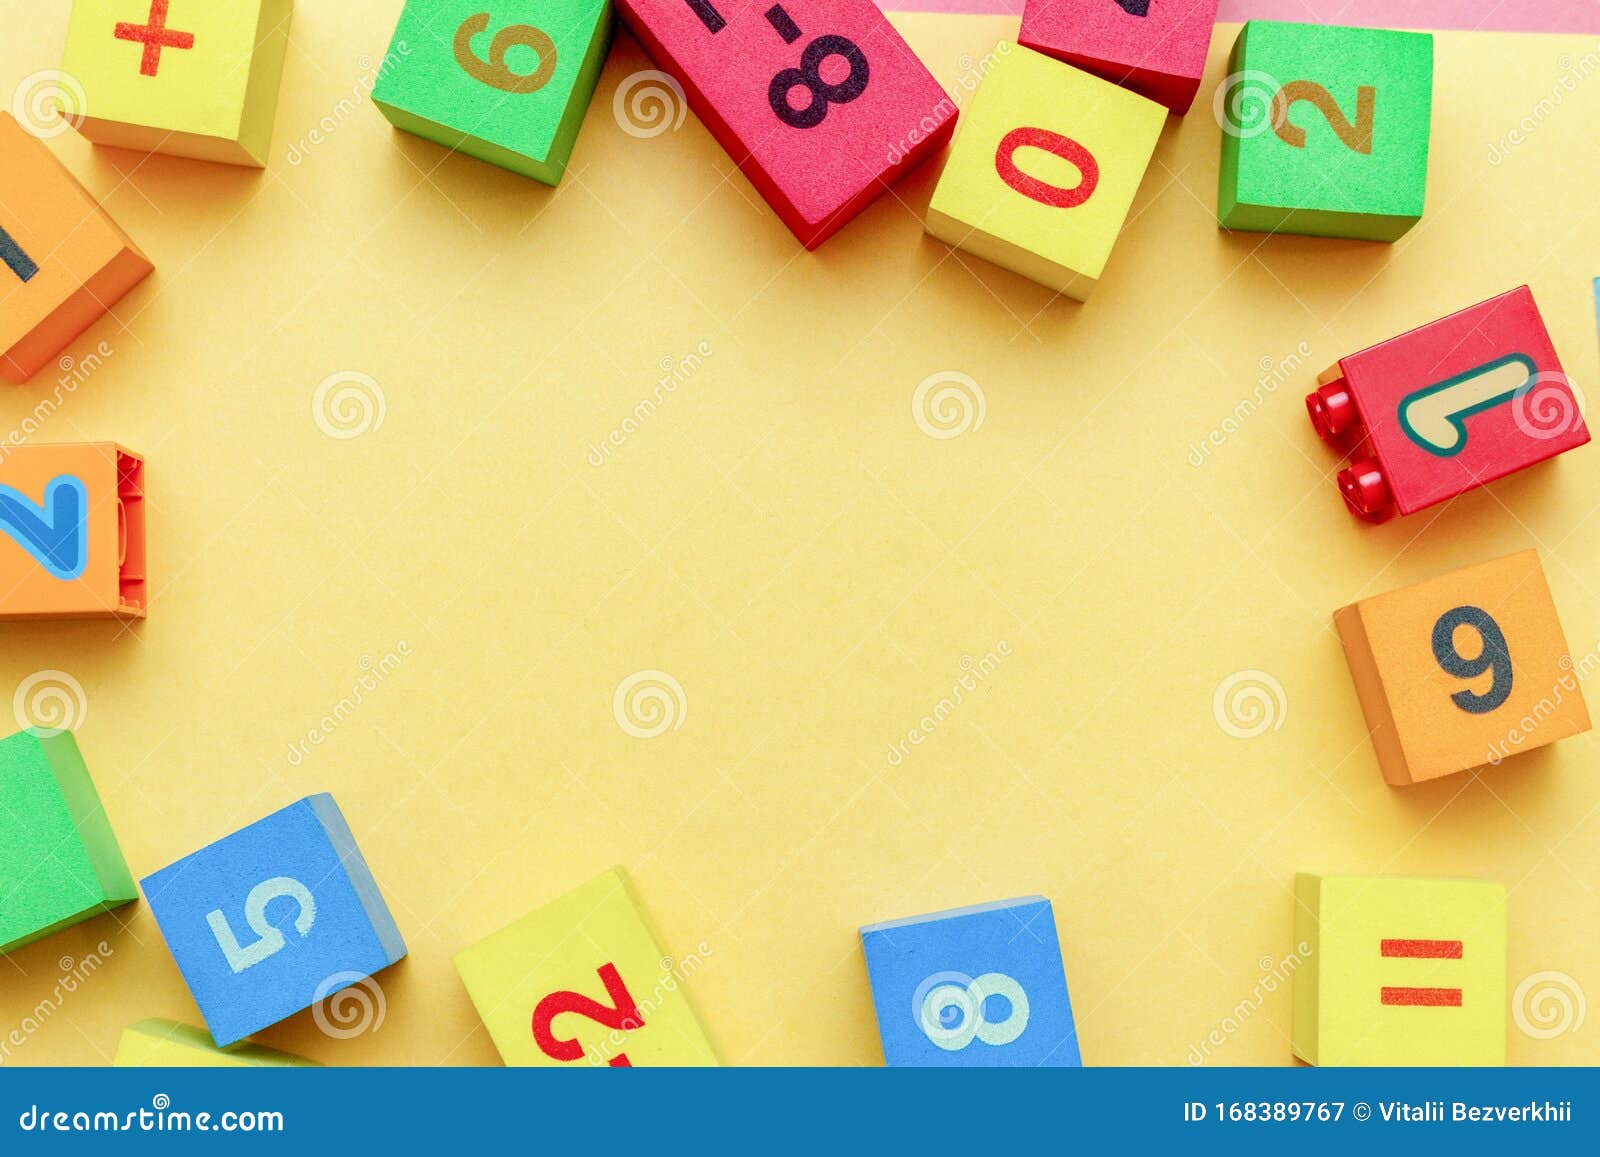 Child Kid Colorful Education Toys Cubes with Numbers Math Pattern ...